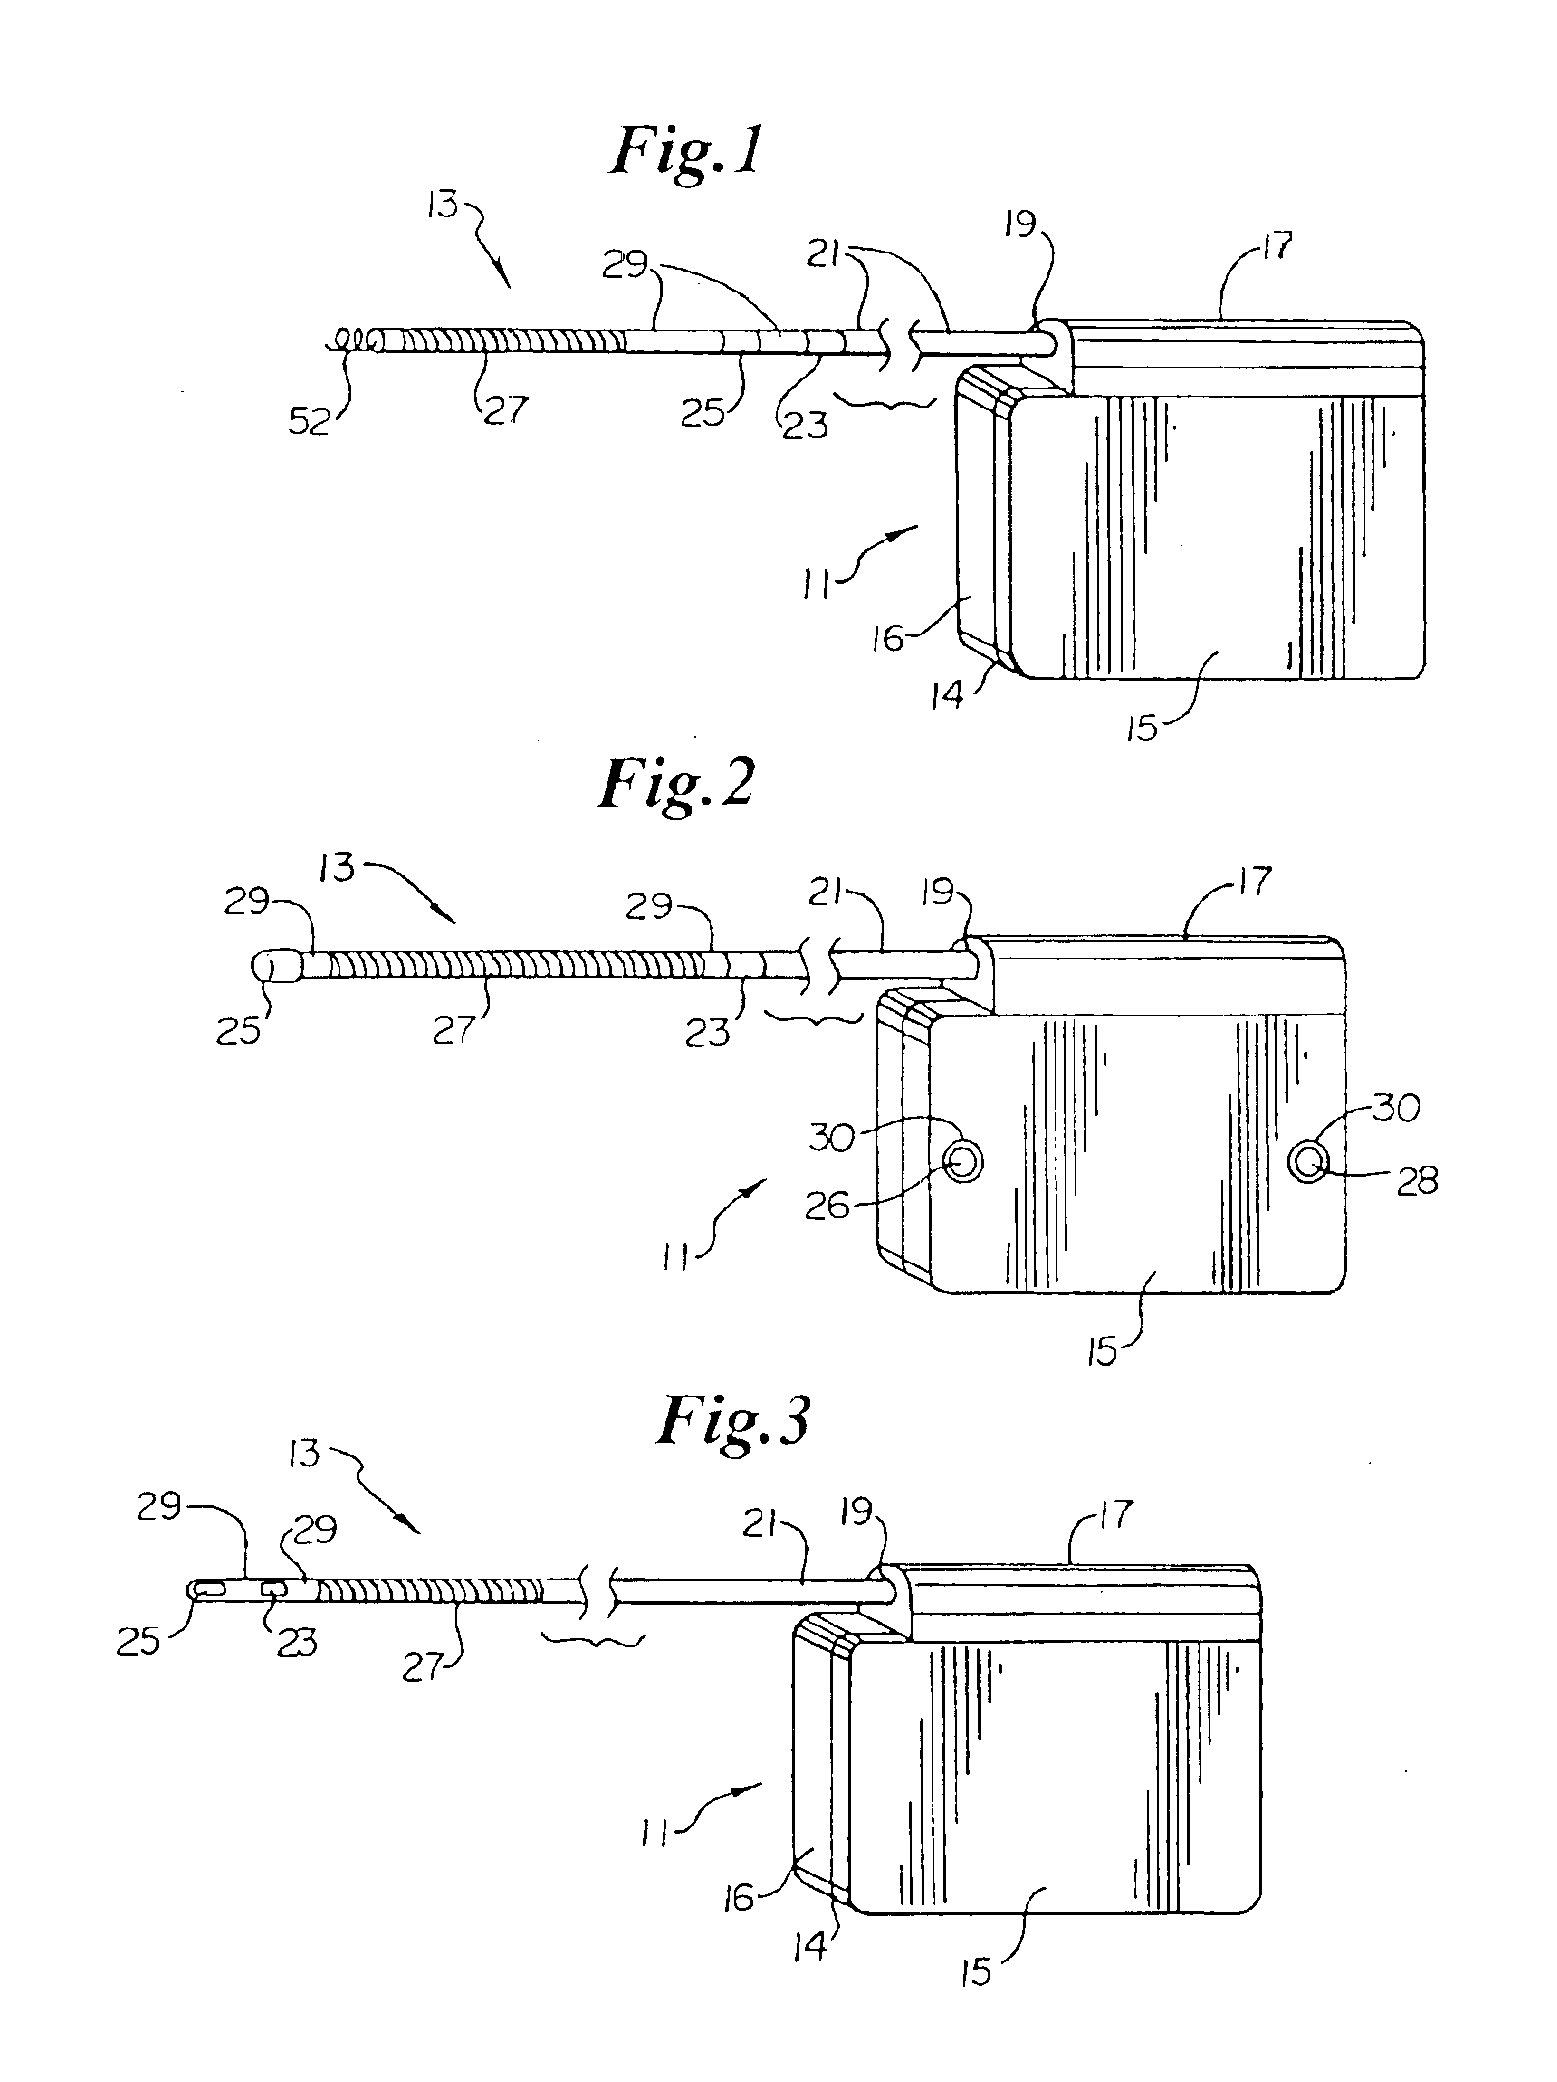 Method of insertion and implantation of implantable cardioverter-defibrillator canisters